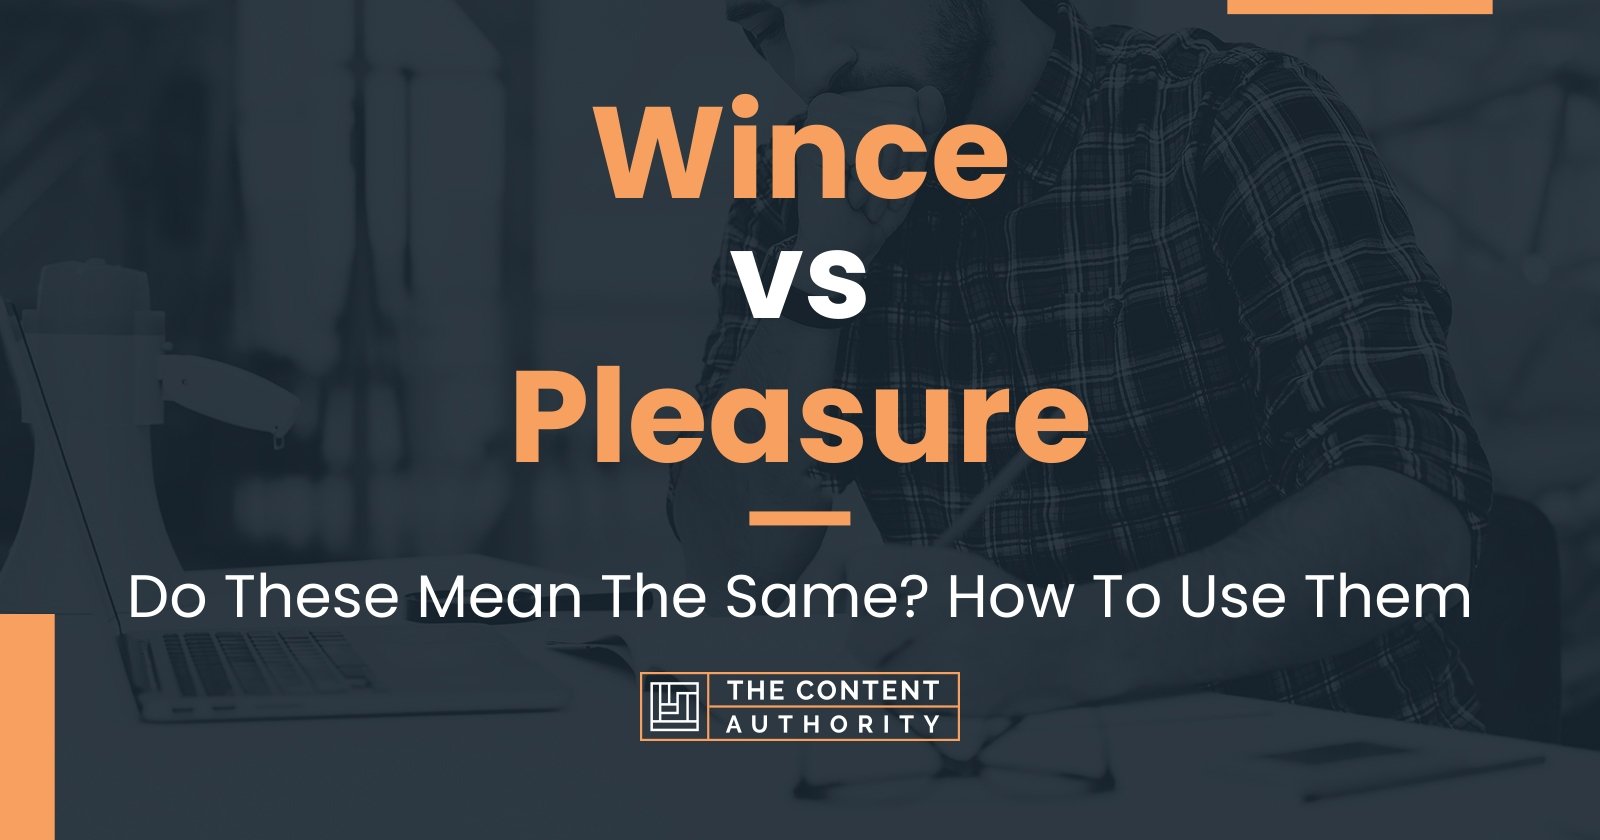 Wince vs Pleasure: Do These Mean The Same? How To Use Them